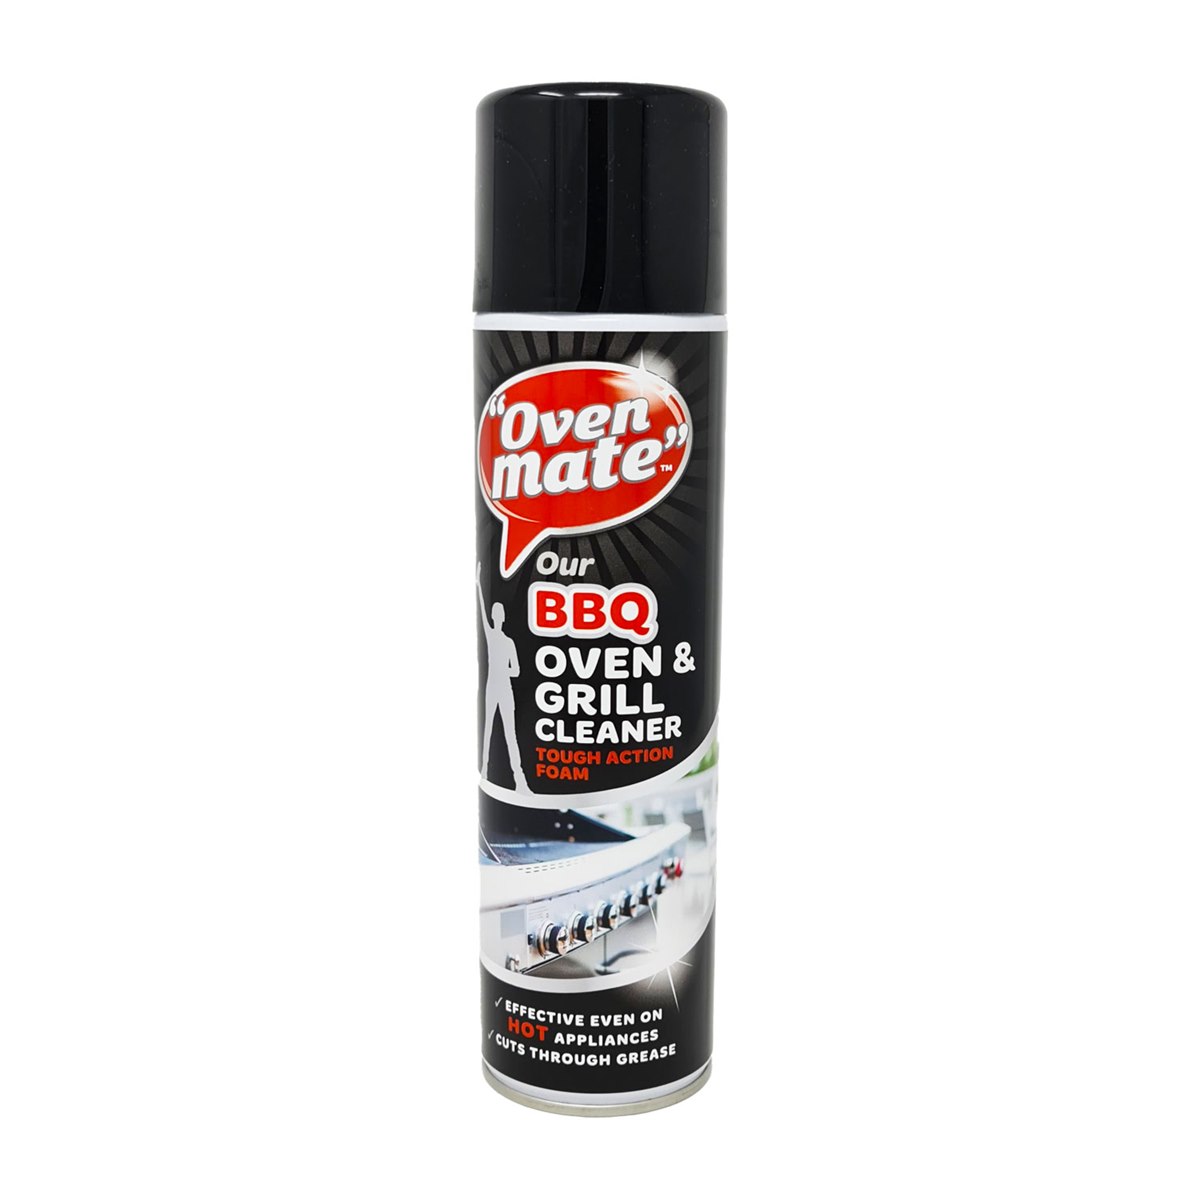 Oven Mate BBQ Oven Grill Cleaner Spray